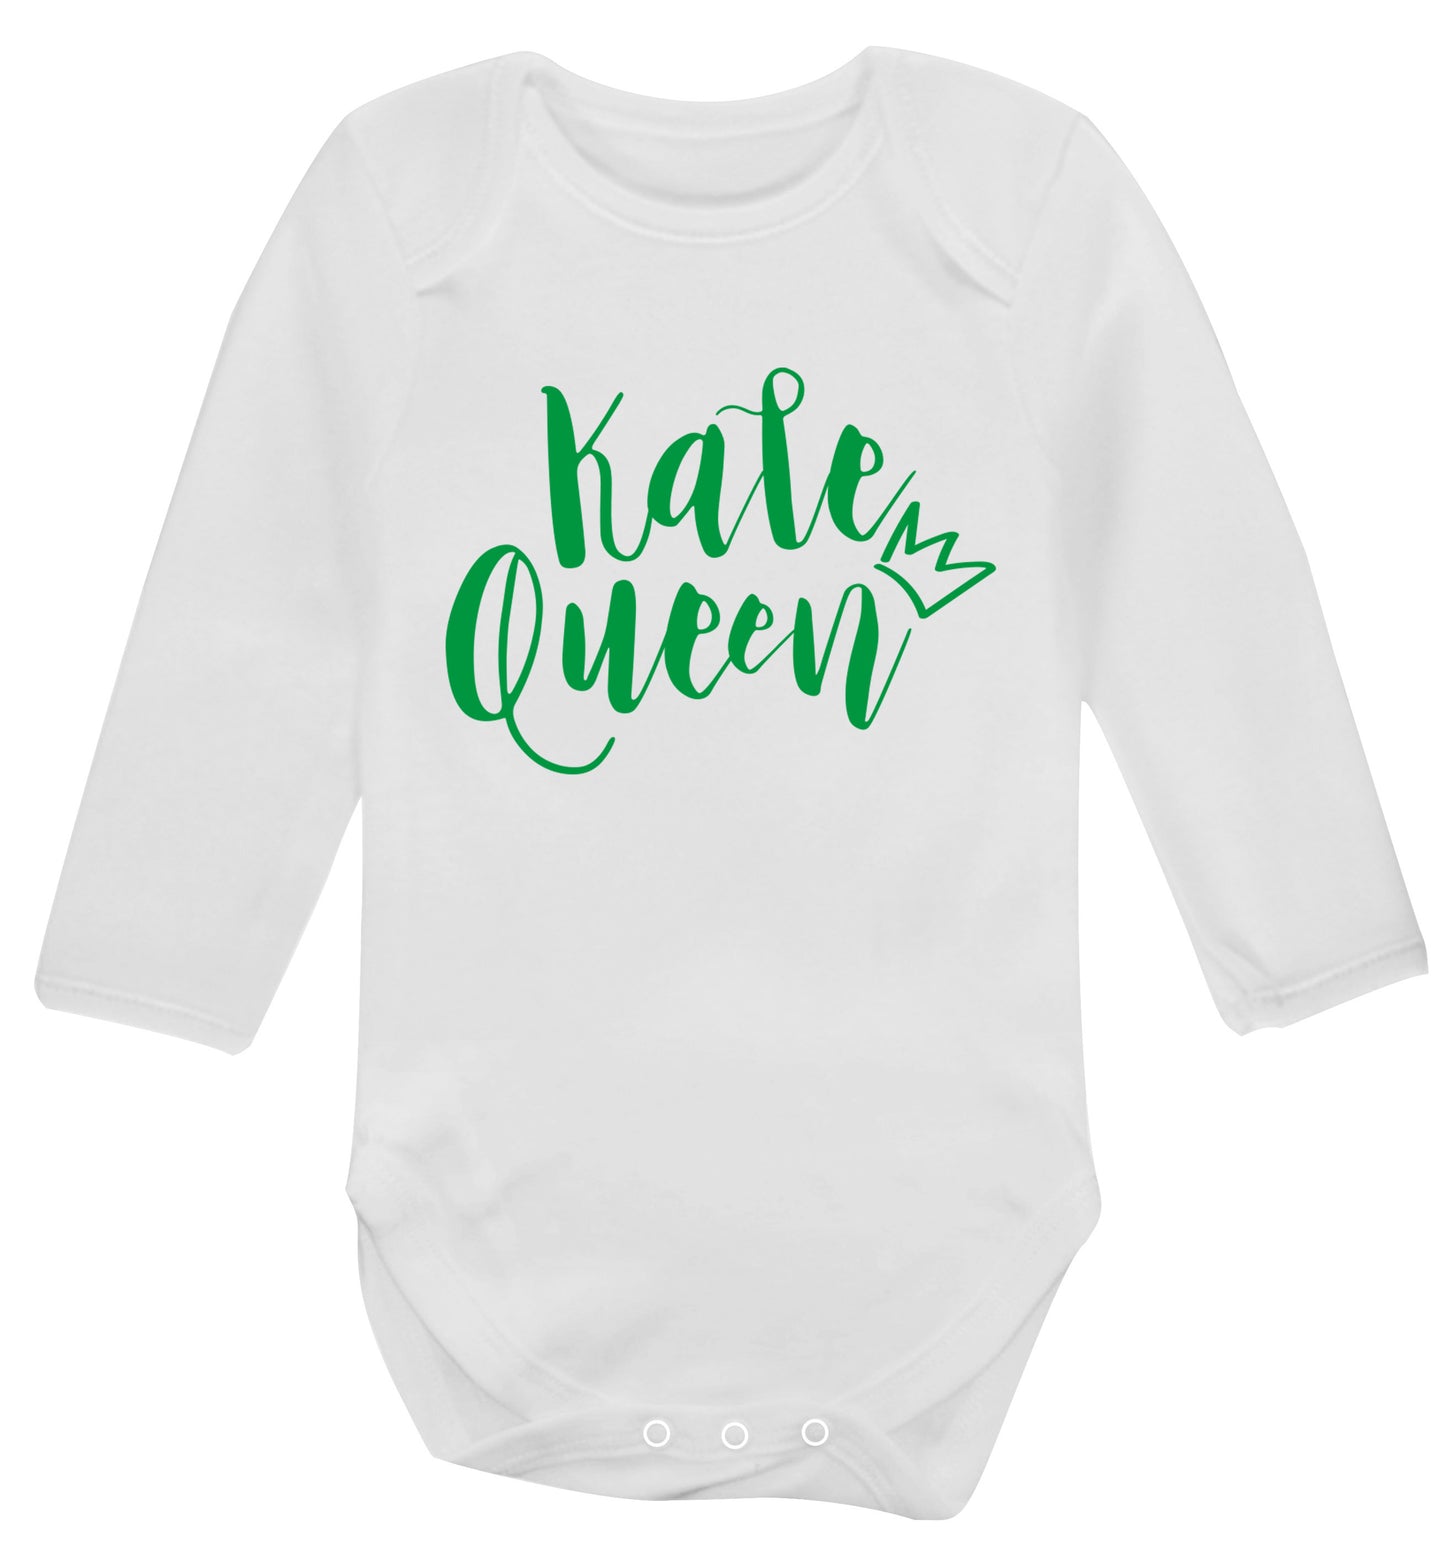 Kale Queen Baby Vest long sleeved white 6-12 months